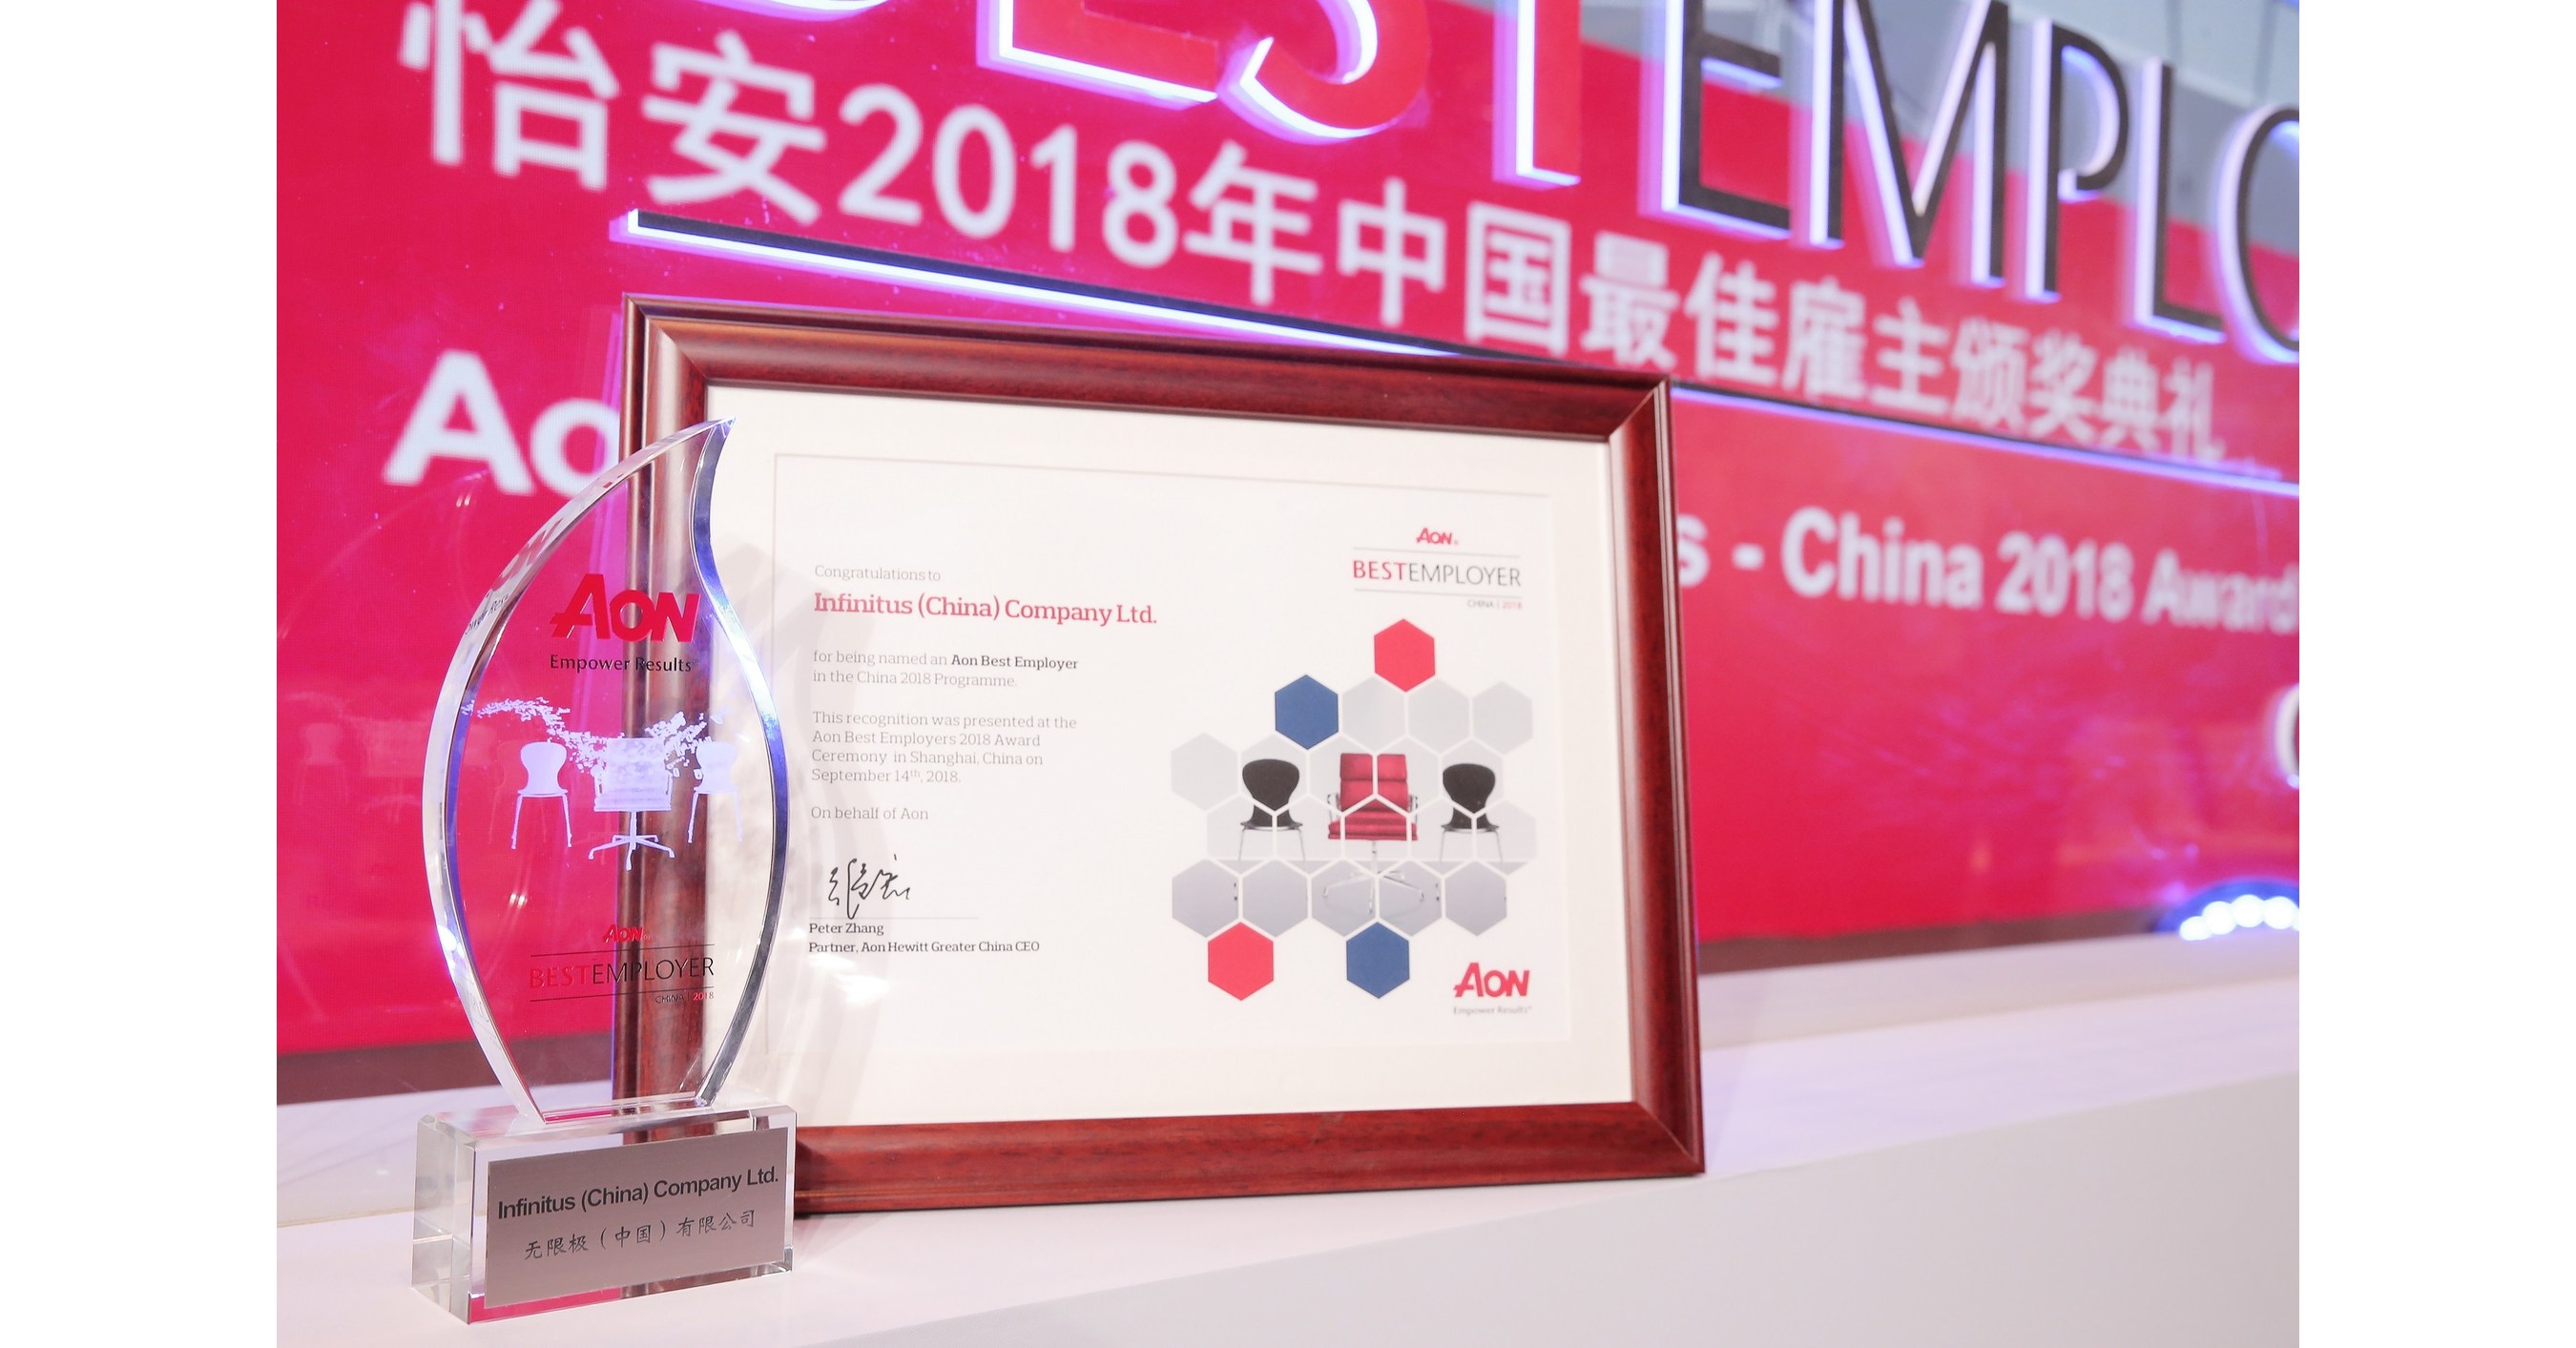 Infinitus (China) Named Best EmployerChina for the Sixth Time